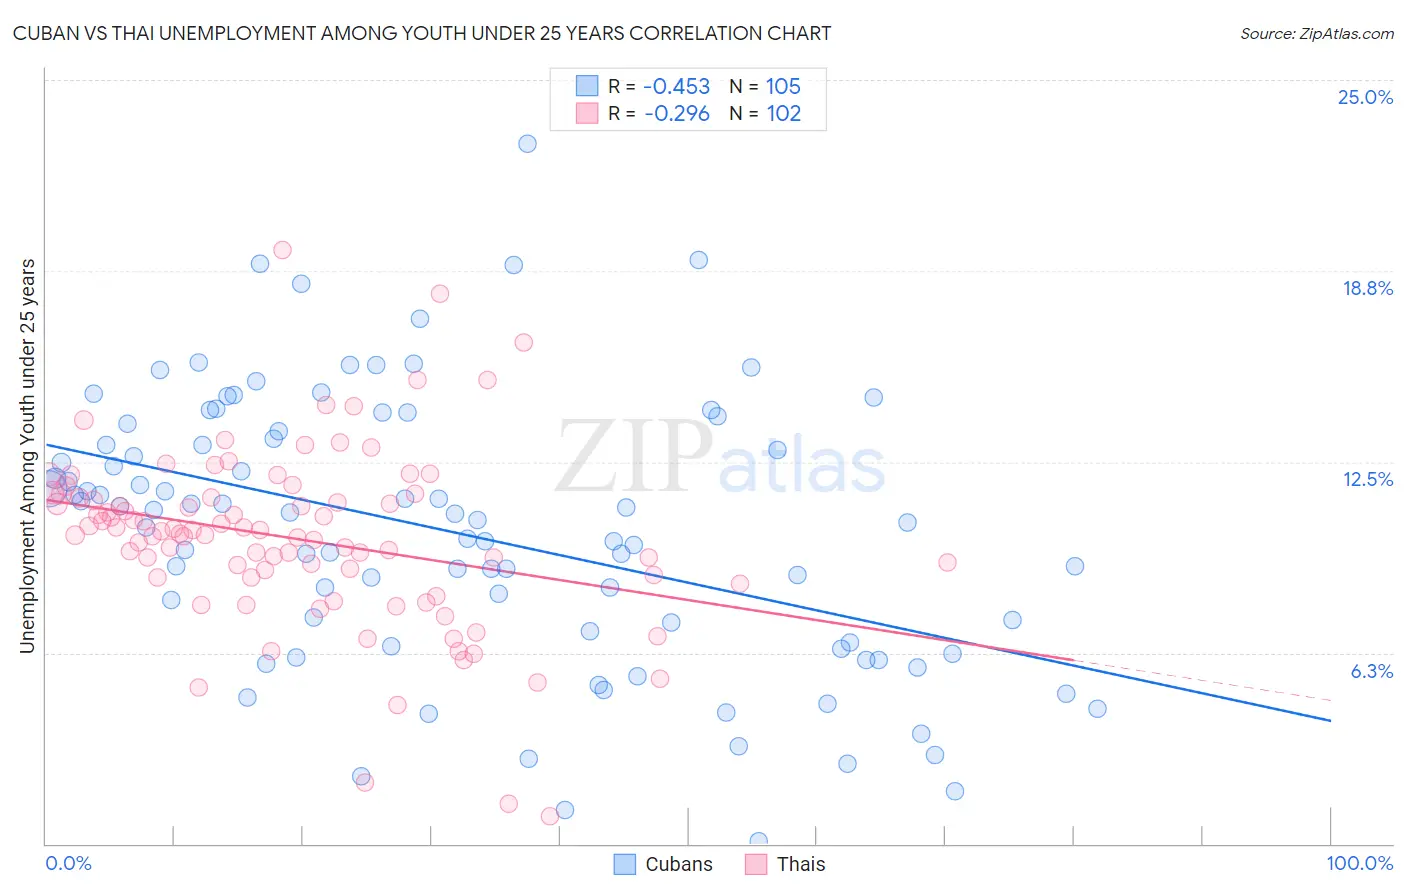 Cuban vs Thai Unemployment Among Youth under 25 years